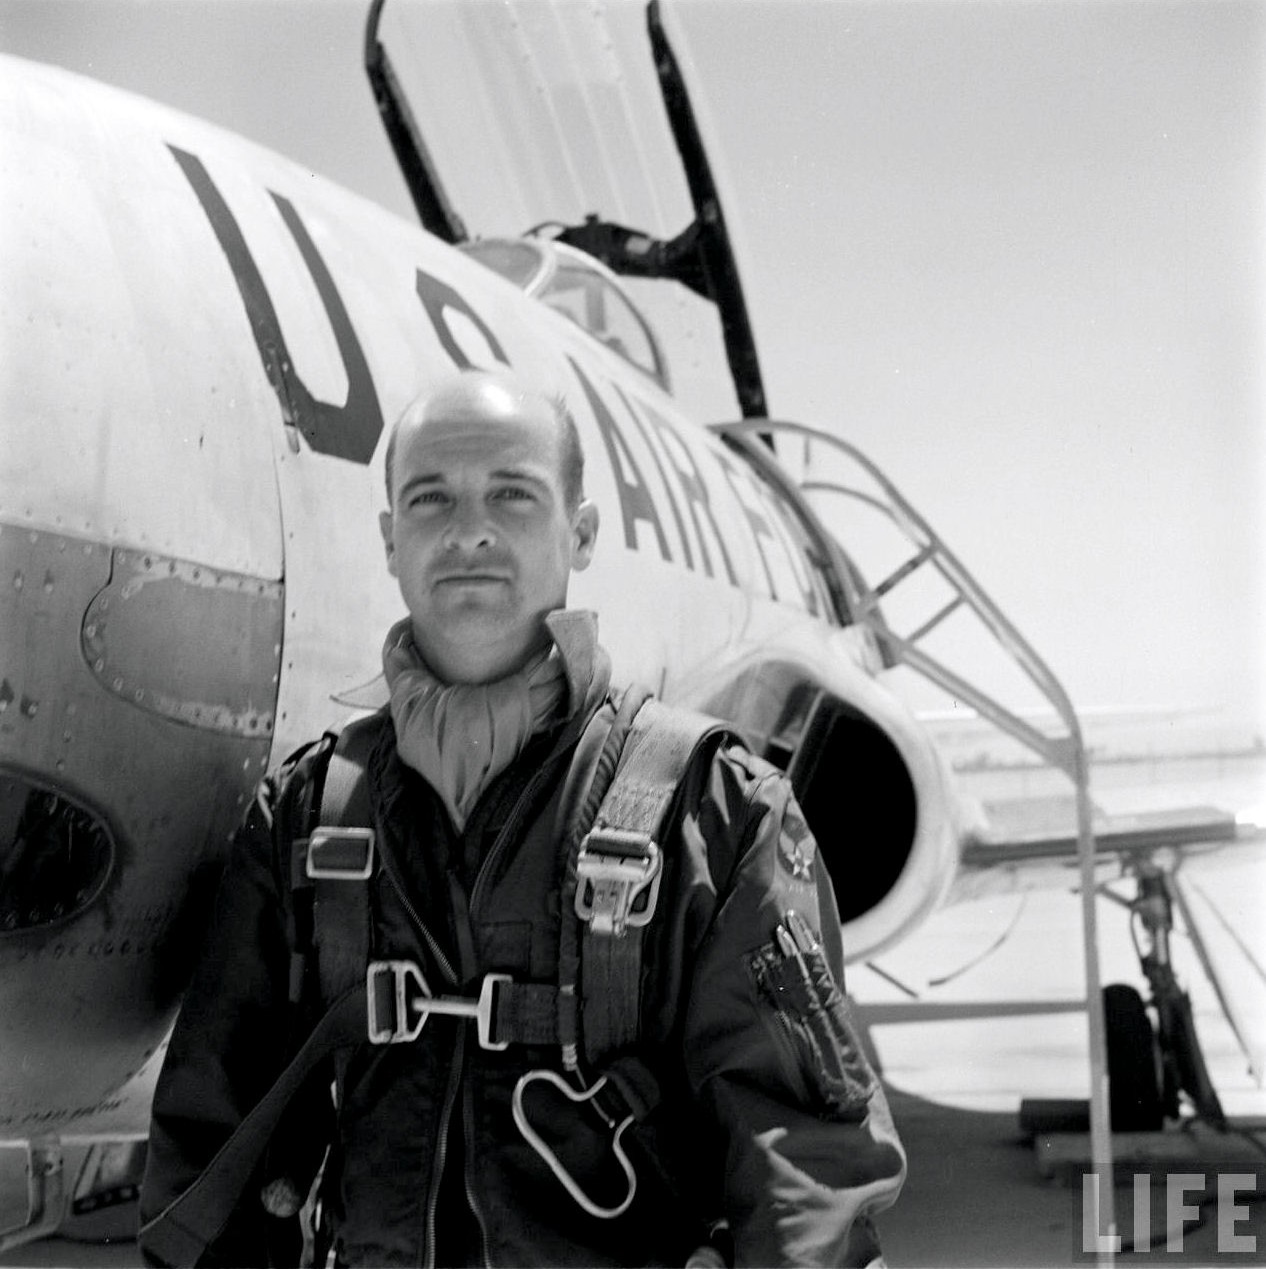 Captain Milburn Grant Apt, United States Air Force, with a Lockheed T-33A Shooting Star. (LIFE Magazine)